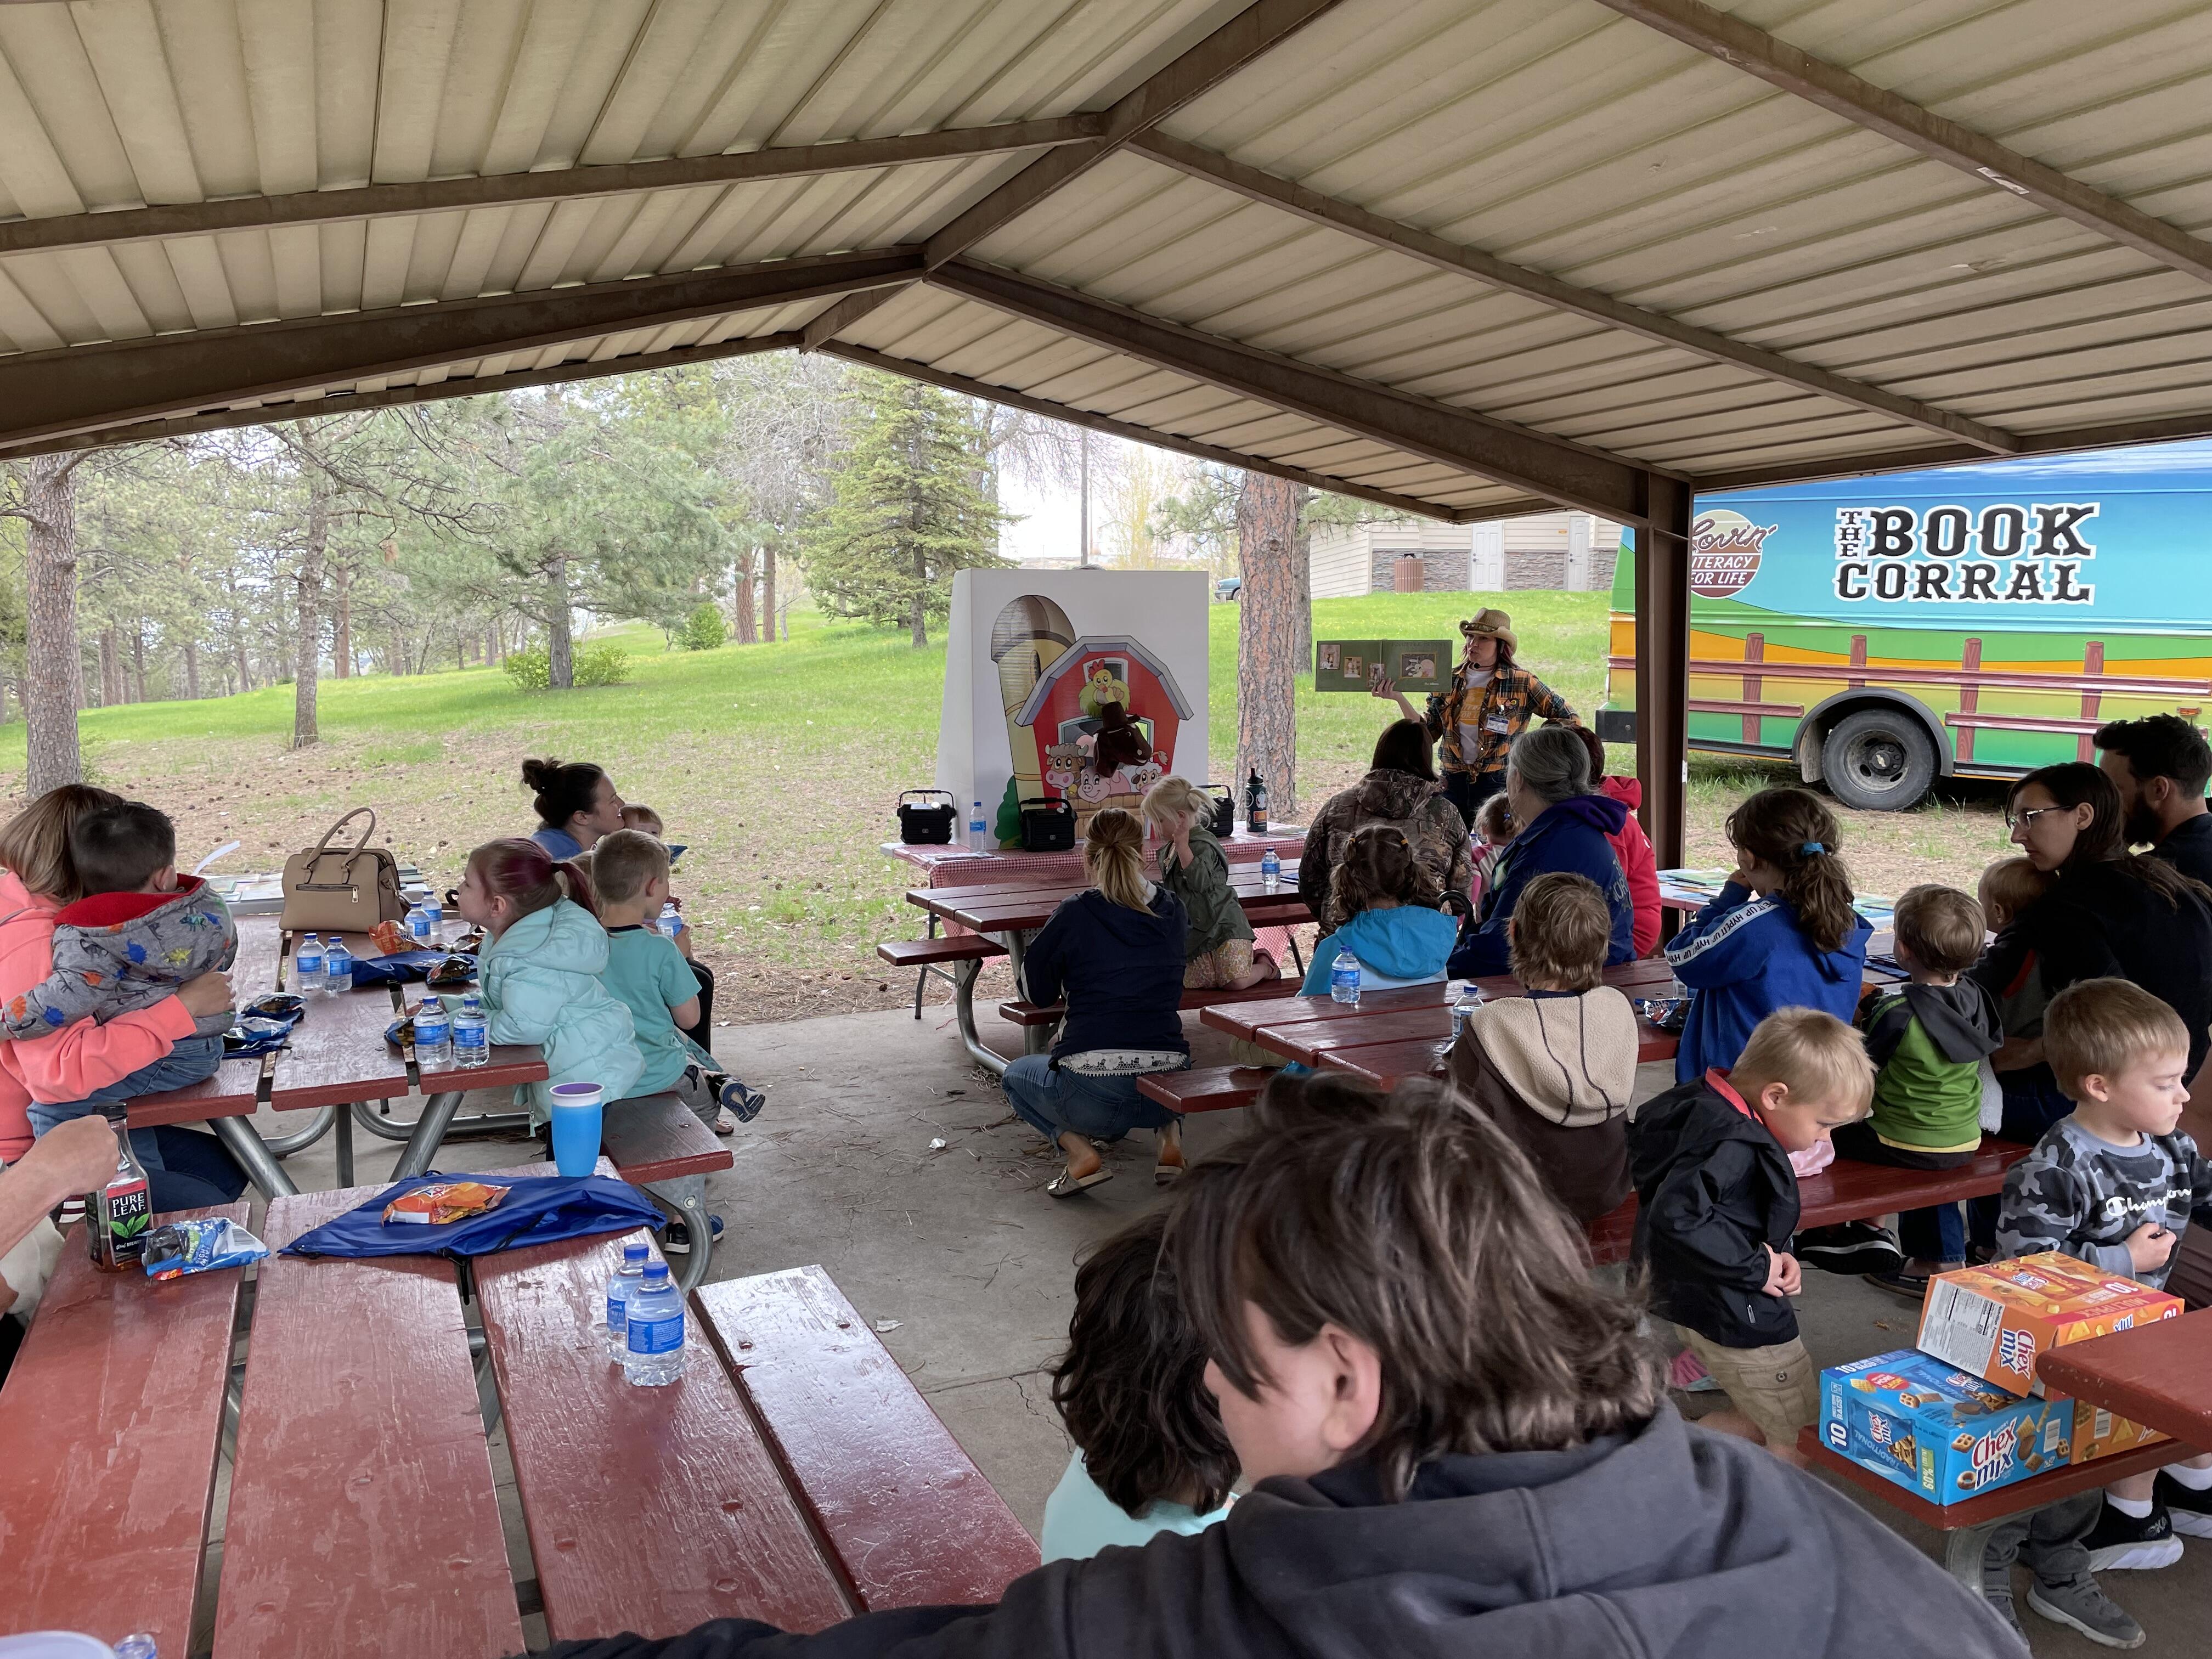 Students outside listening to story time during a reading rodeo